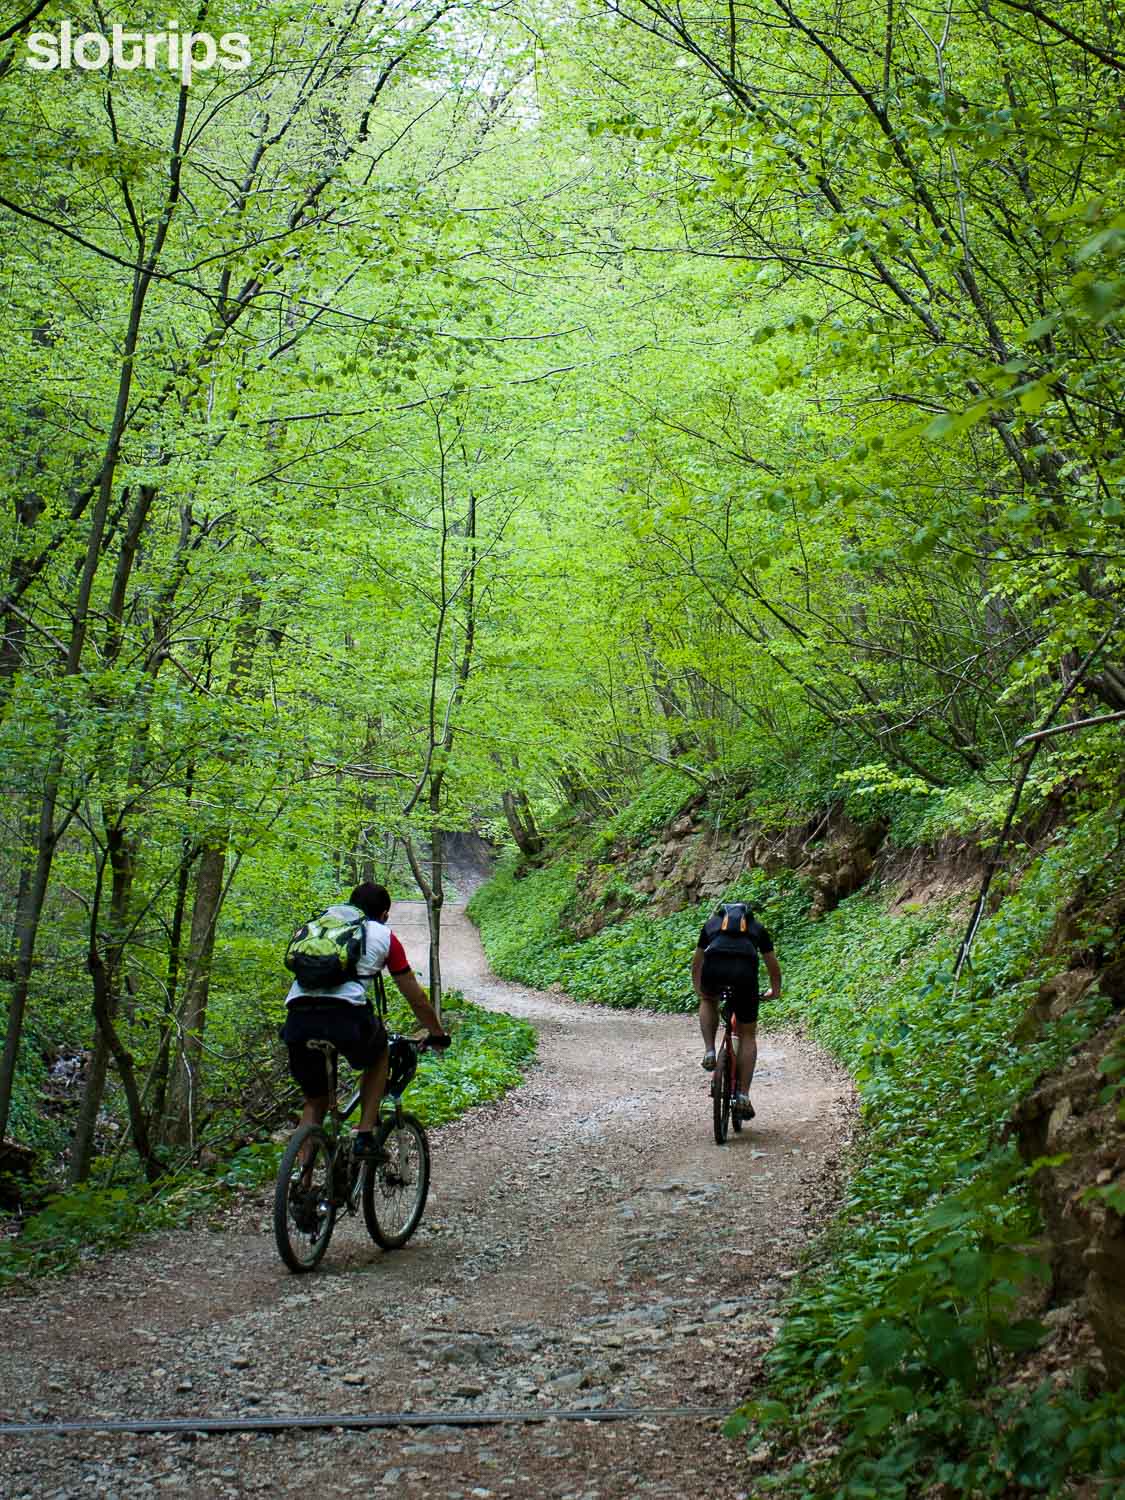 Two mountain bikes descending on a forest road in the forests around Slovenian capital Ljubljana